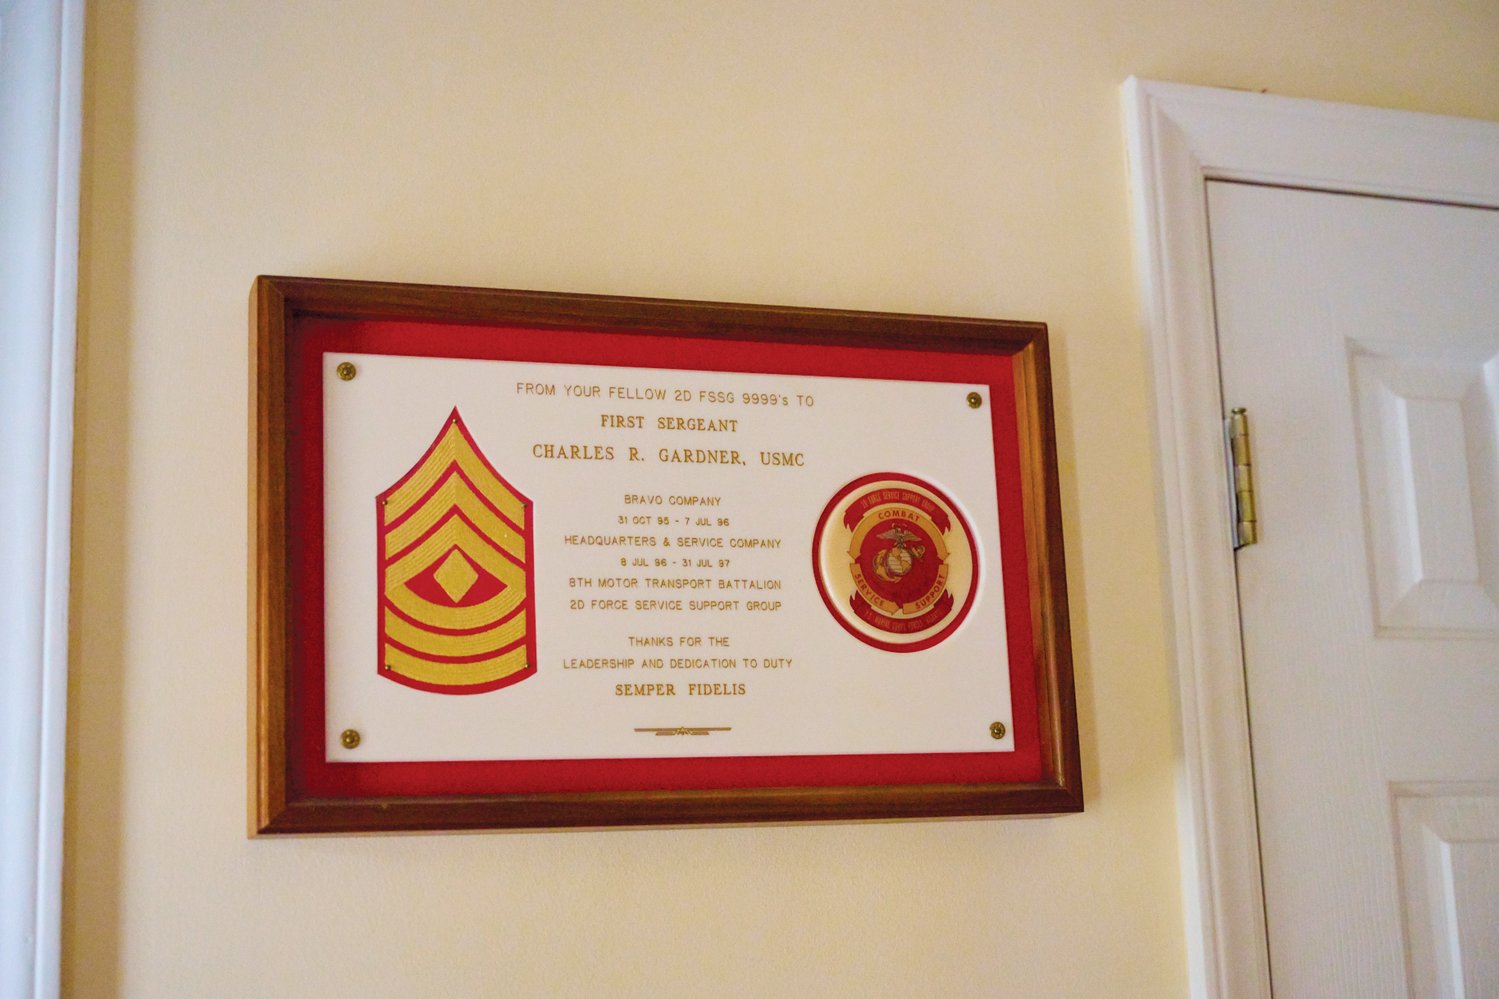 One of the many forms of recognition Gardner has received during his career — this from Gardner's fellow soldiers in the U.S. Marine Corp.